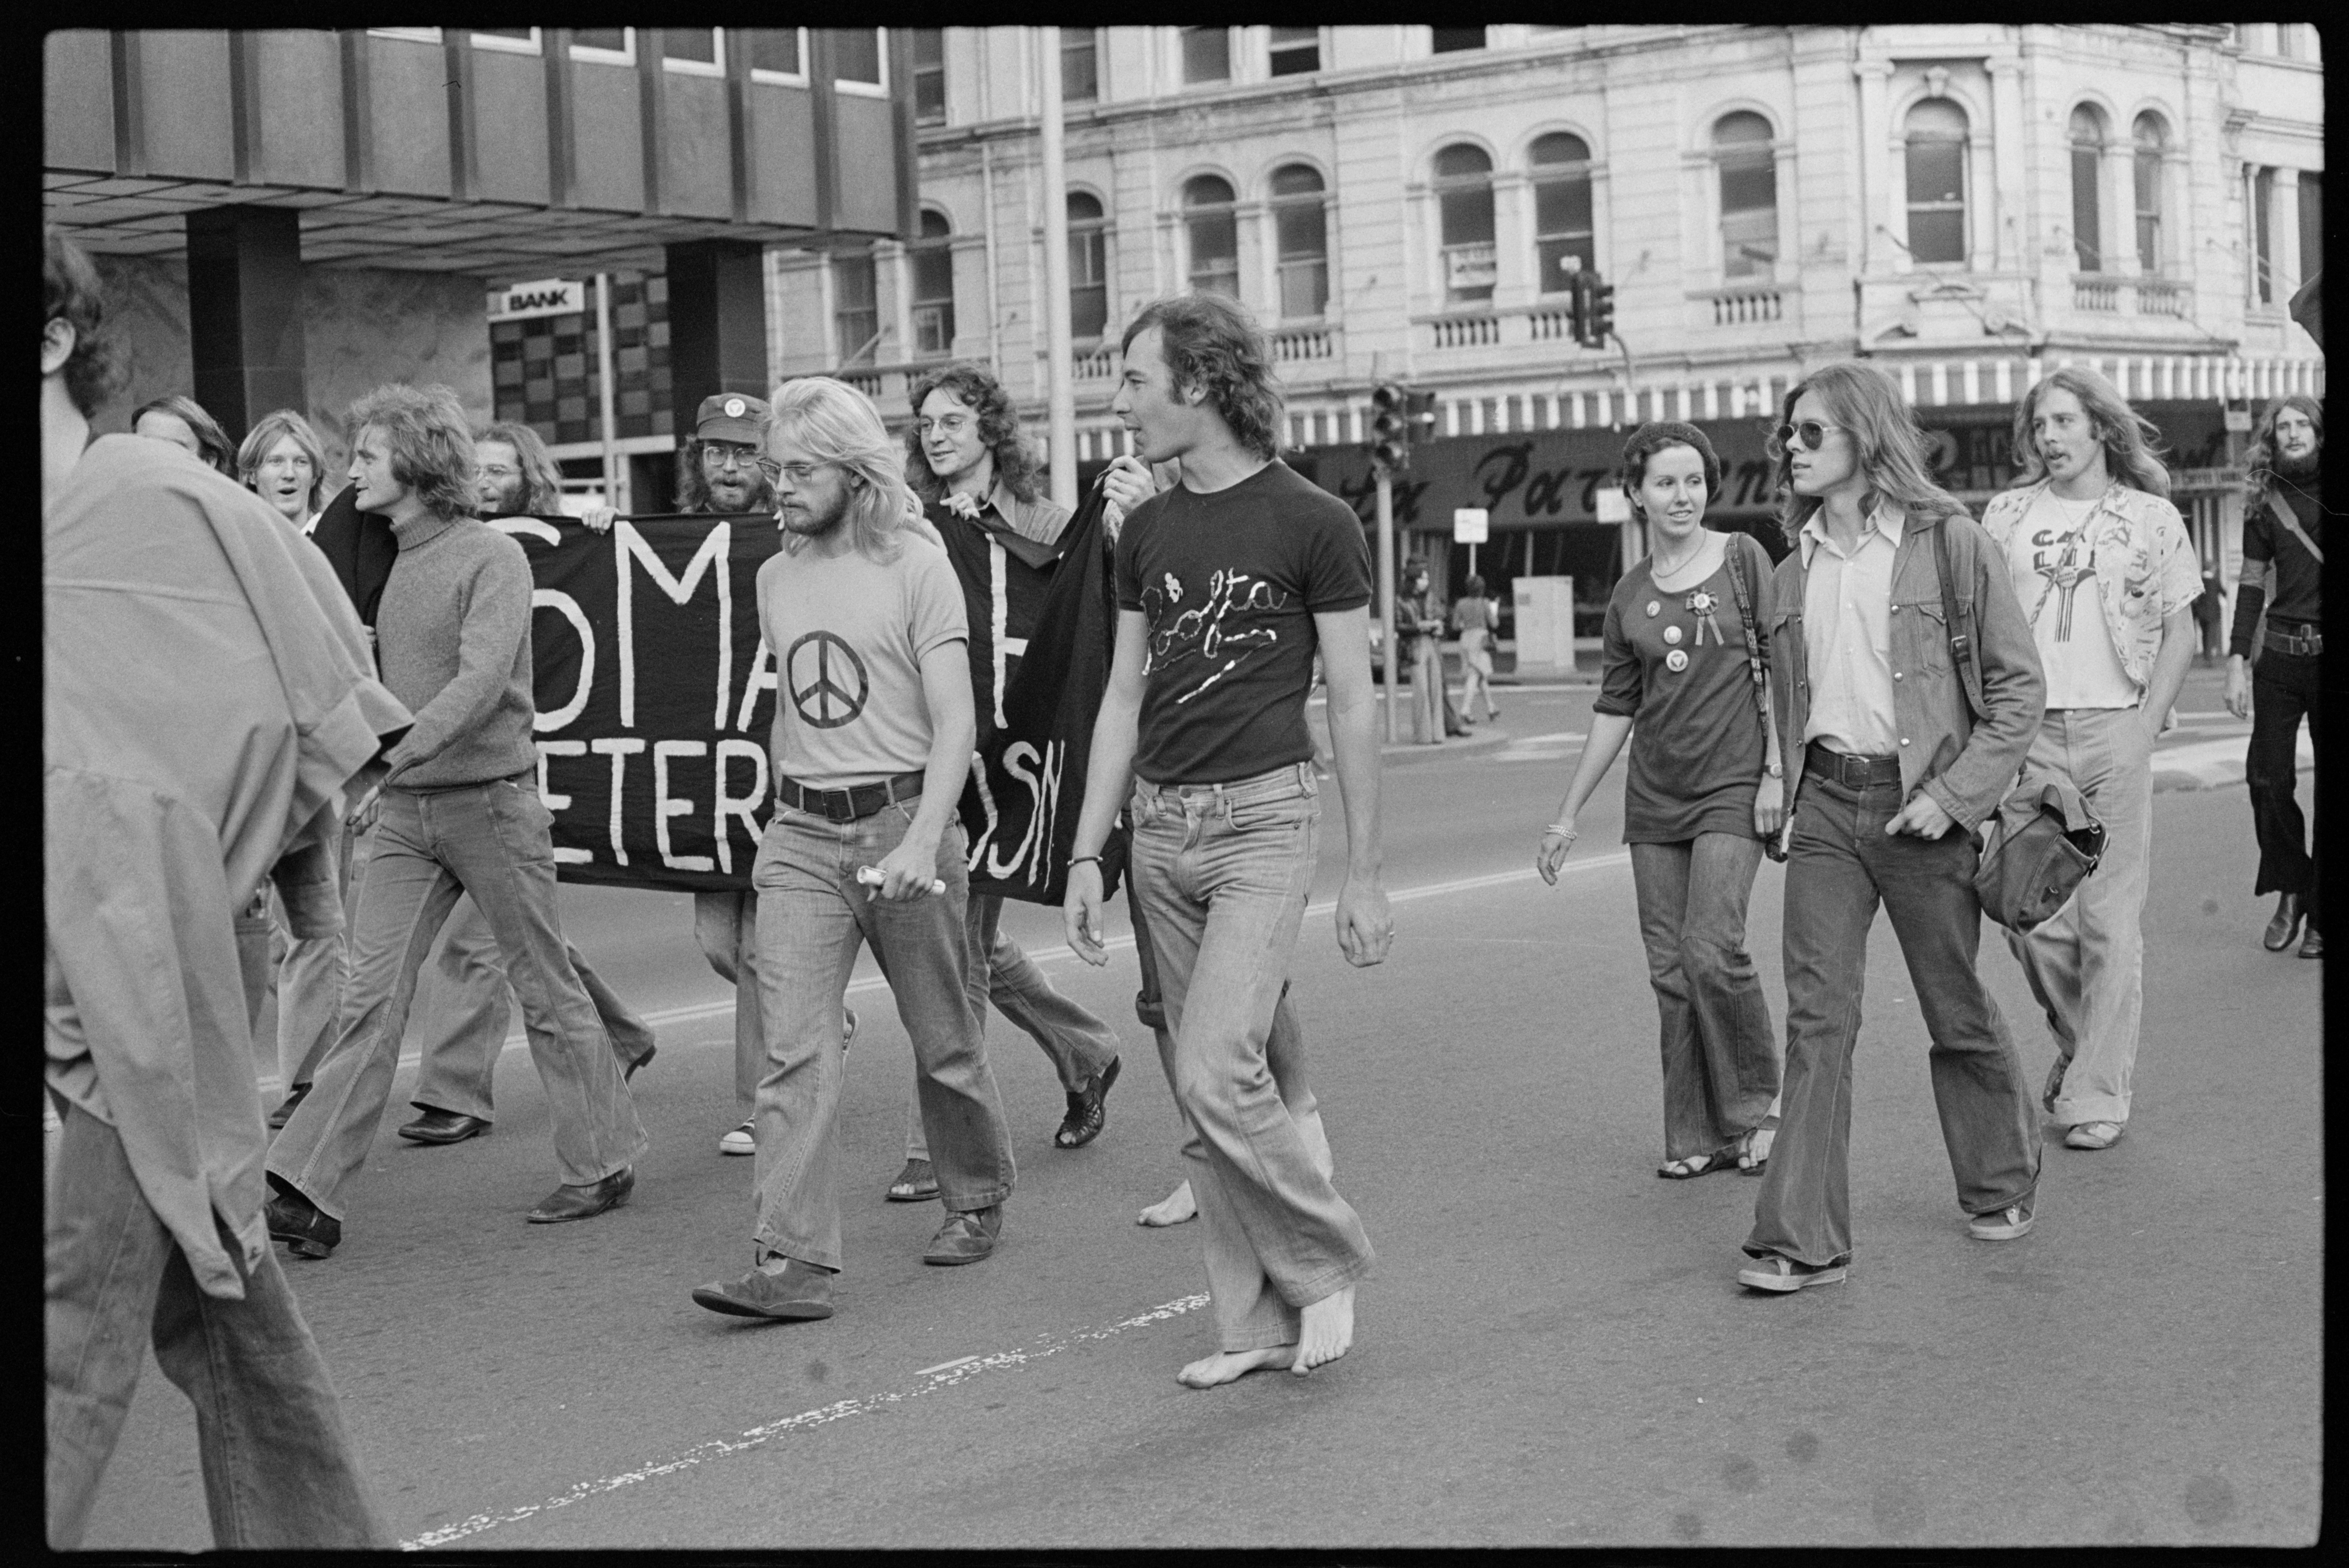 Terry Batterham marching with Sydney Gay Liberation, May Day march, 1974, photographed by Anne Roberts, Tribune negatives collection 